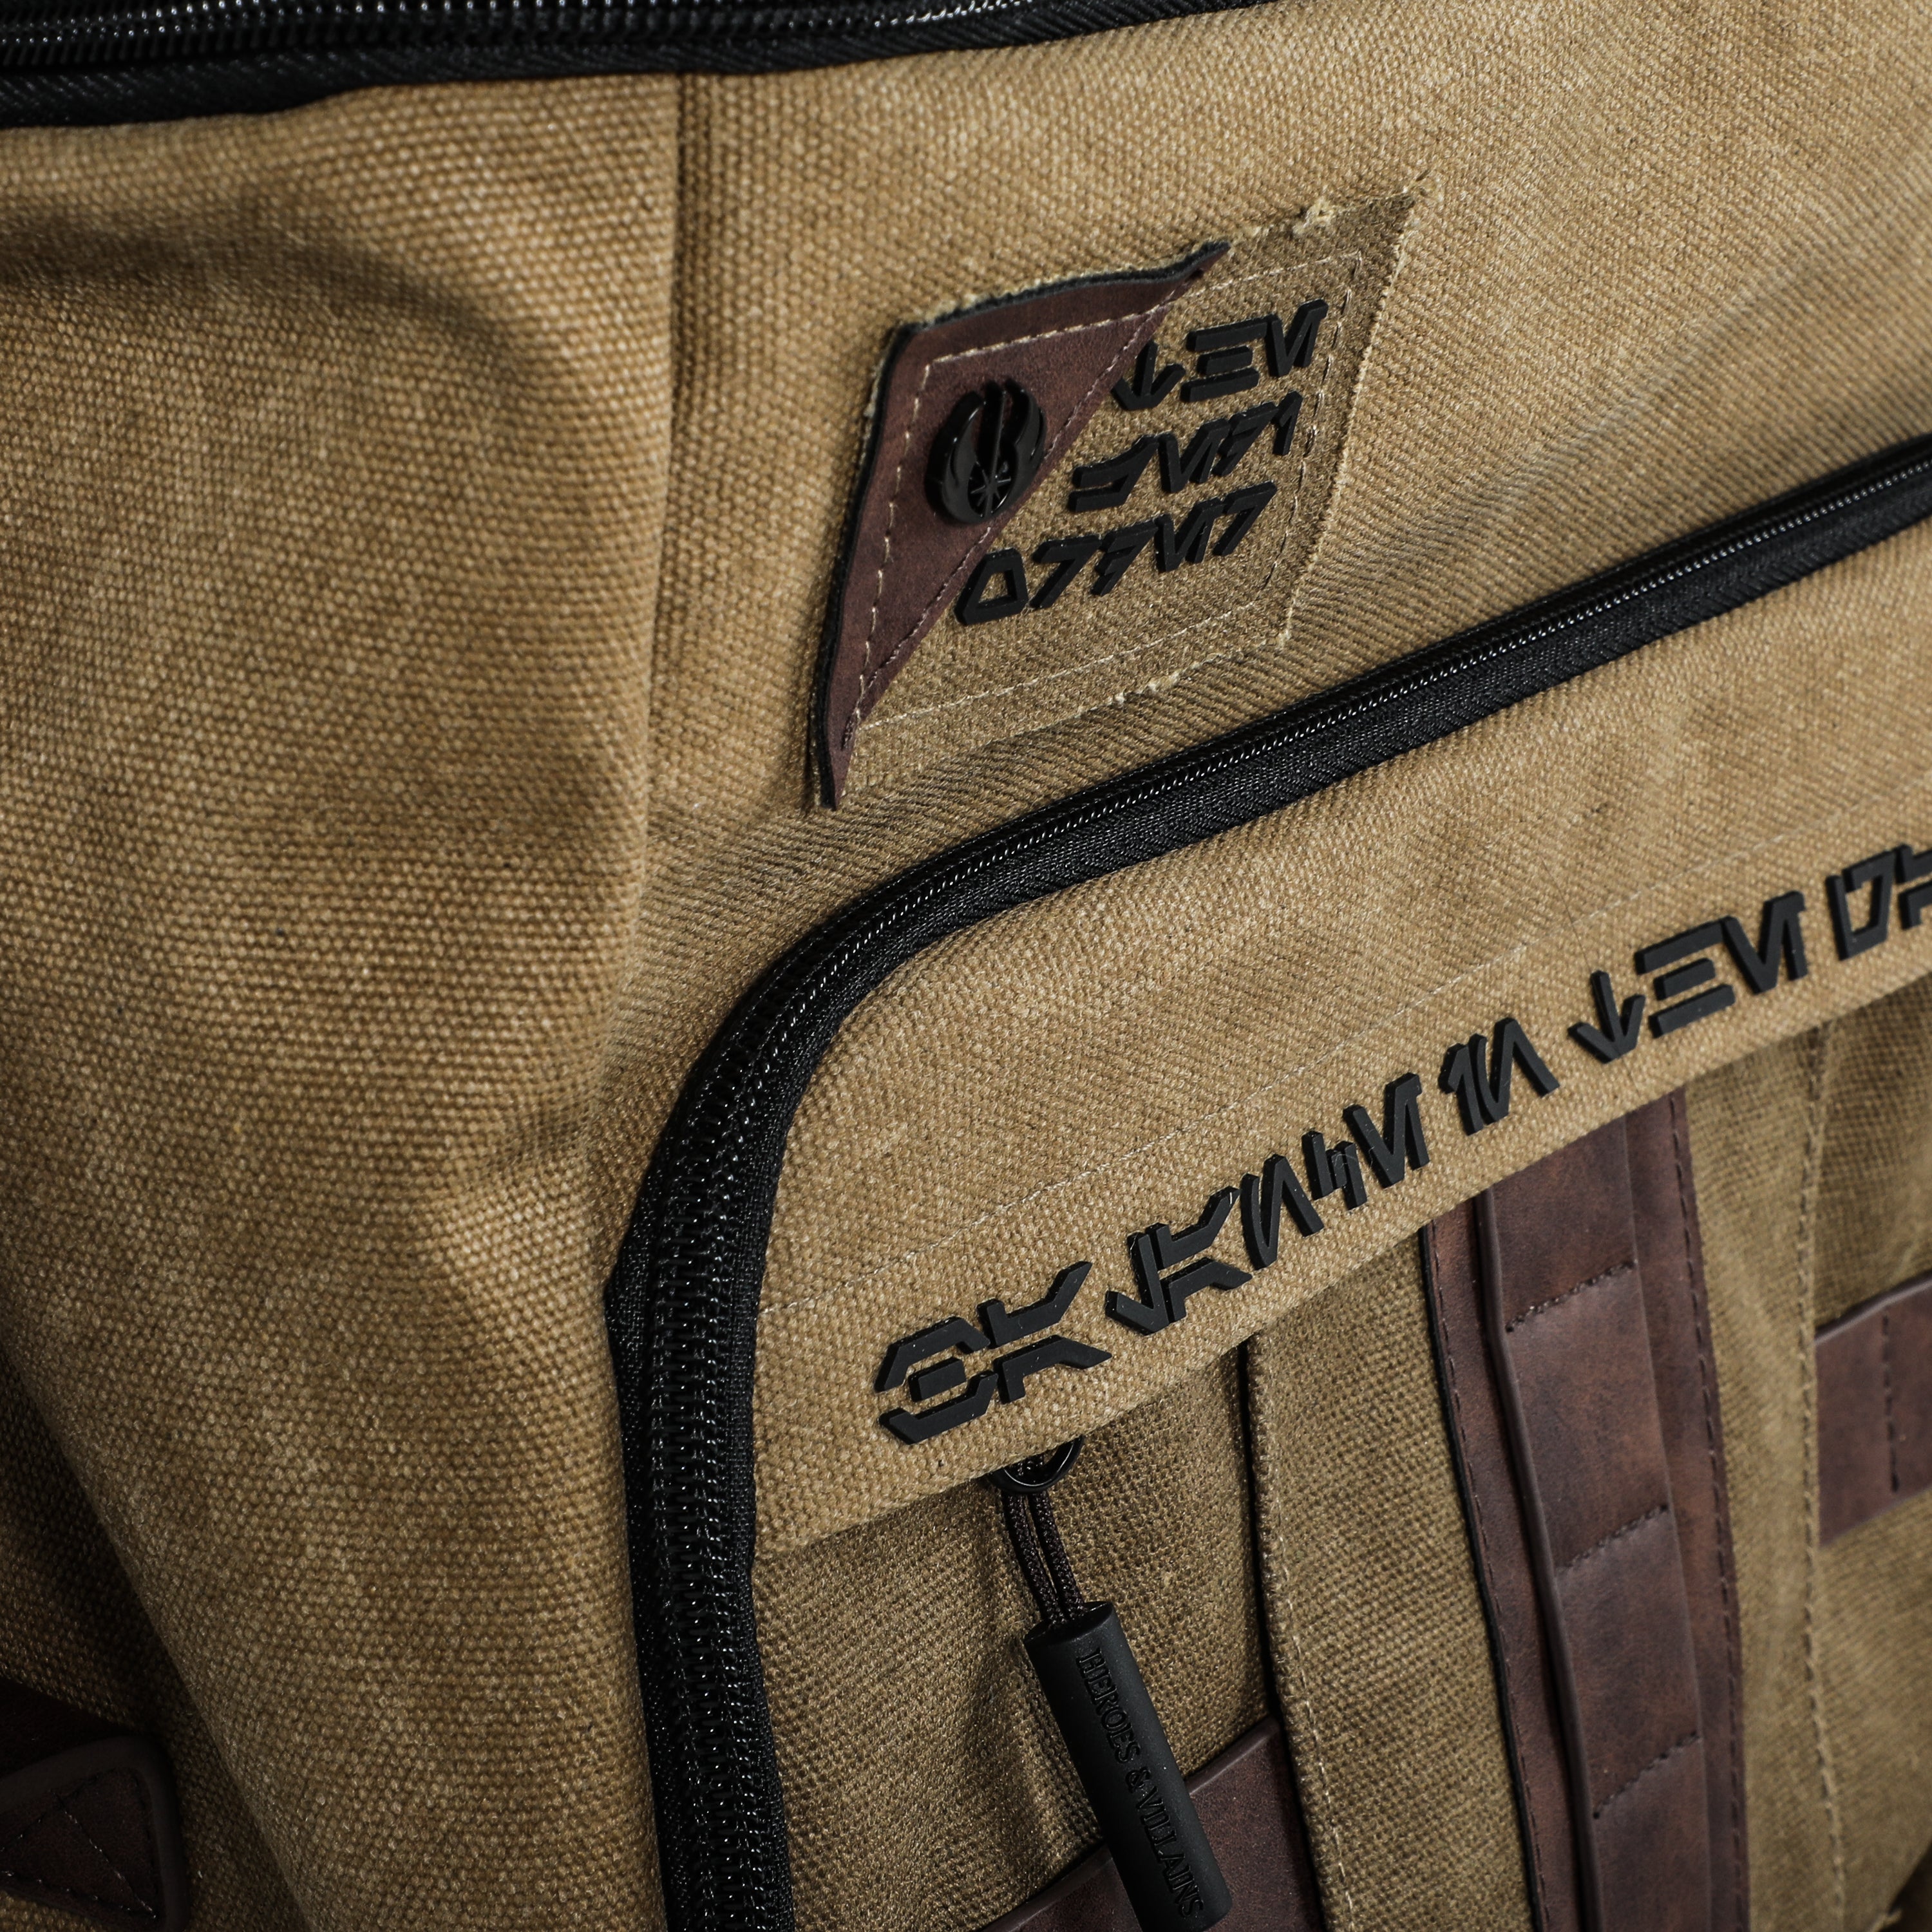 The Jedi Order Convertible Backpack